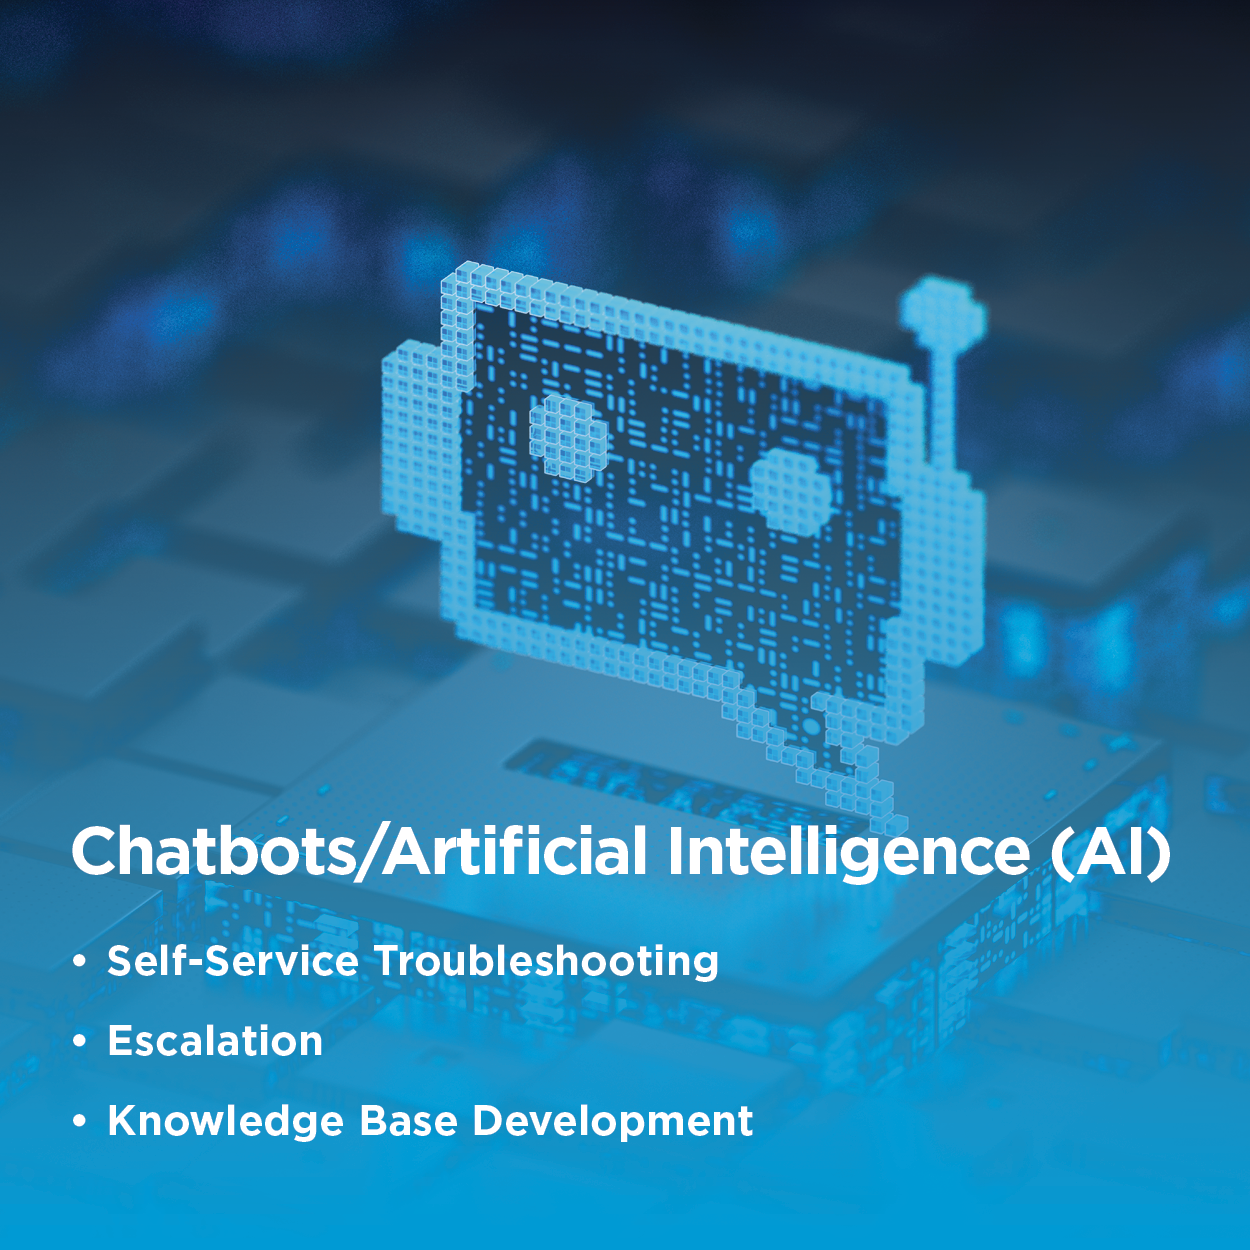 Chatbots/Artificial Intelligence Image